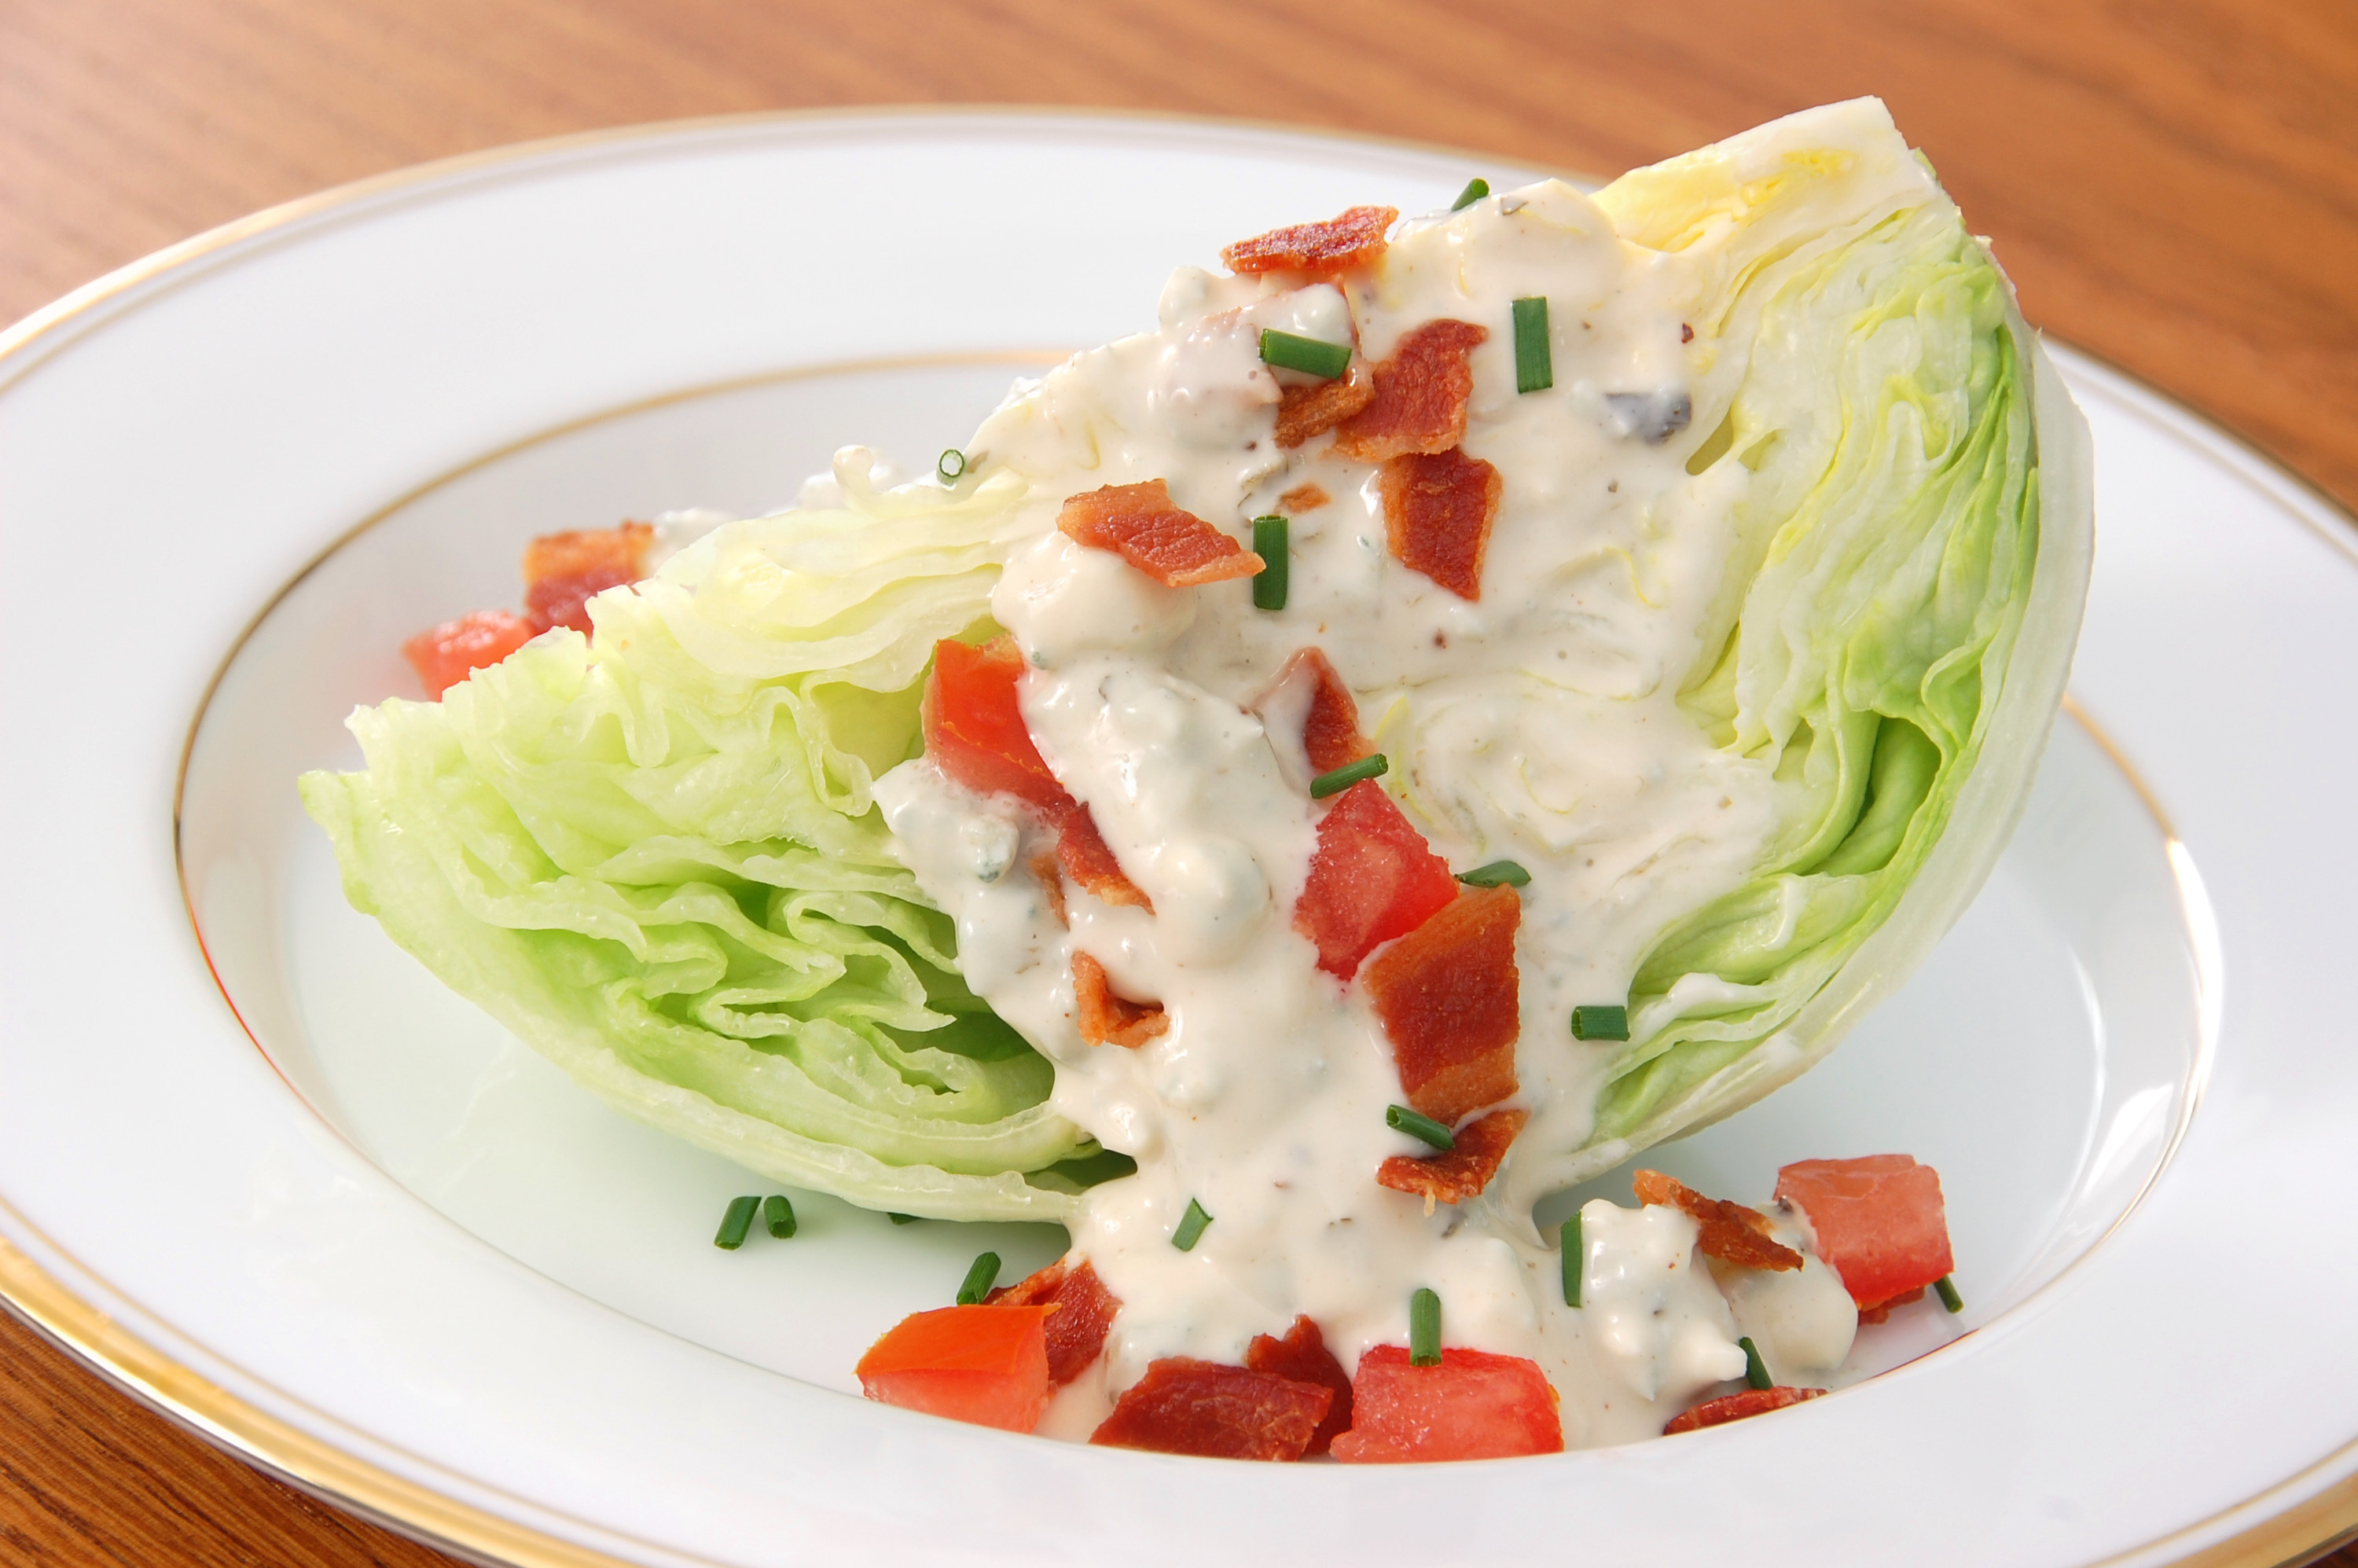 A wedge salad with blue cheese dressing.